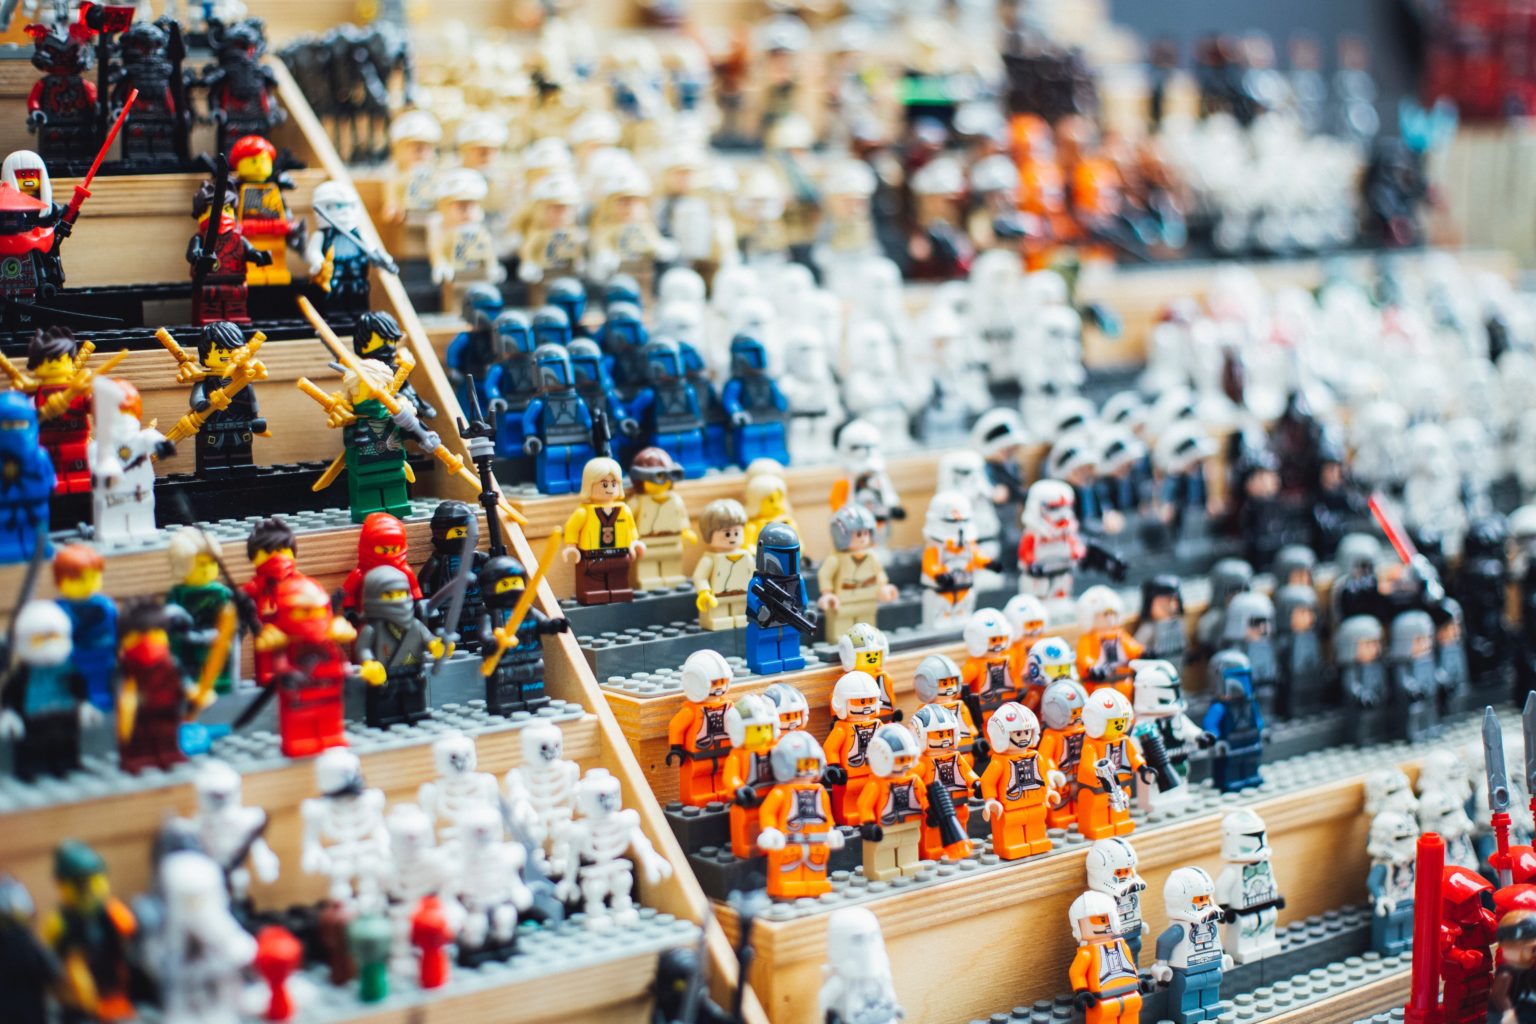 A collection of several Lego figures, with those from Star Wars in focus.